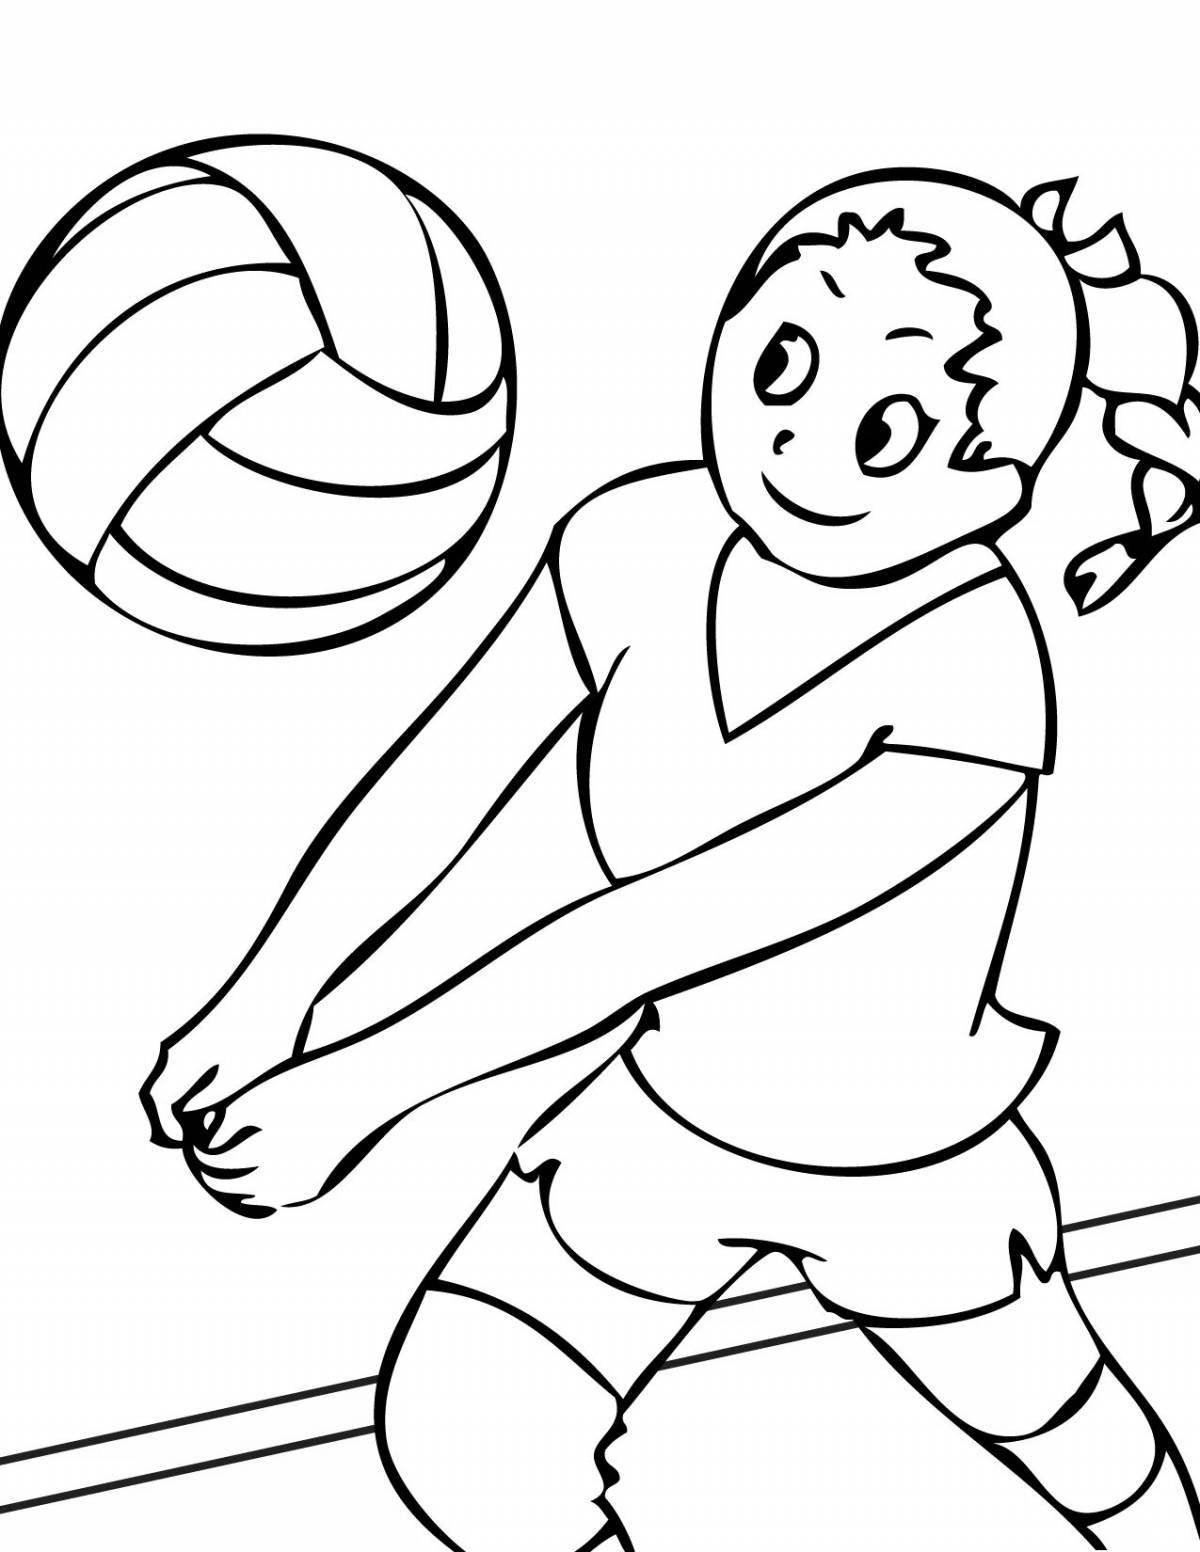 Recreational physical education coloring book